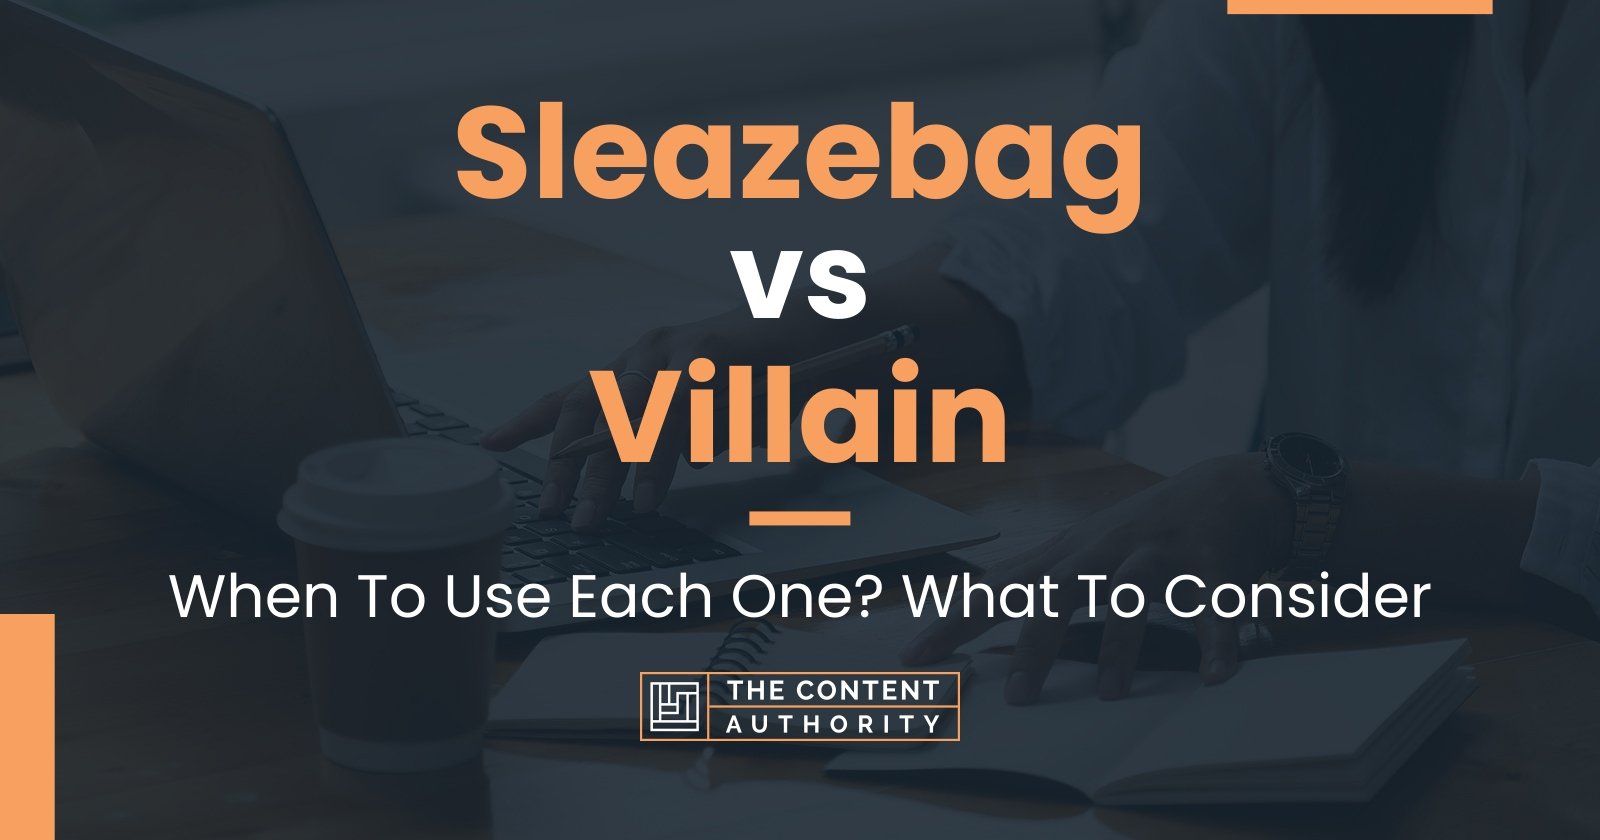 Sleazebag vs Villain: When To Use Each One? What To Consider